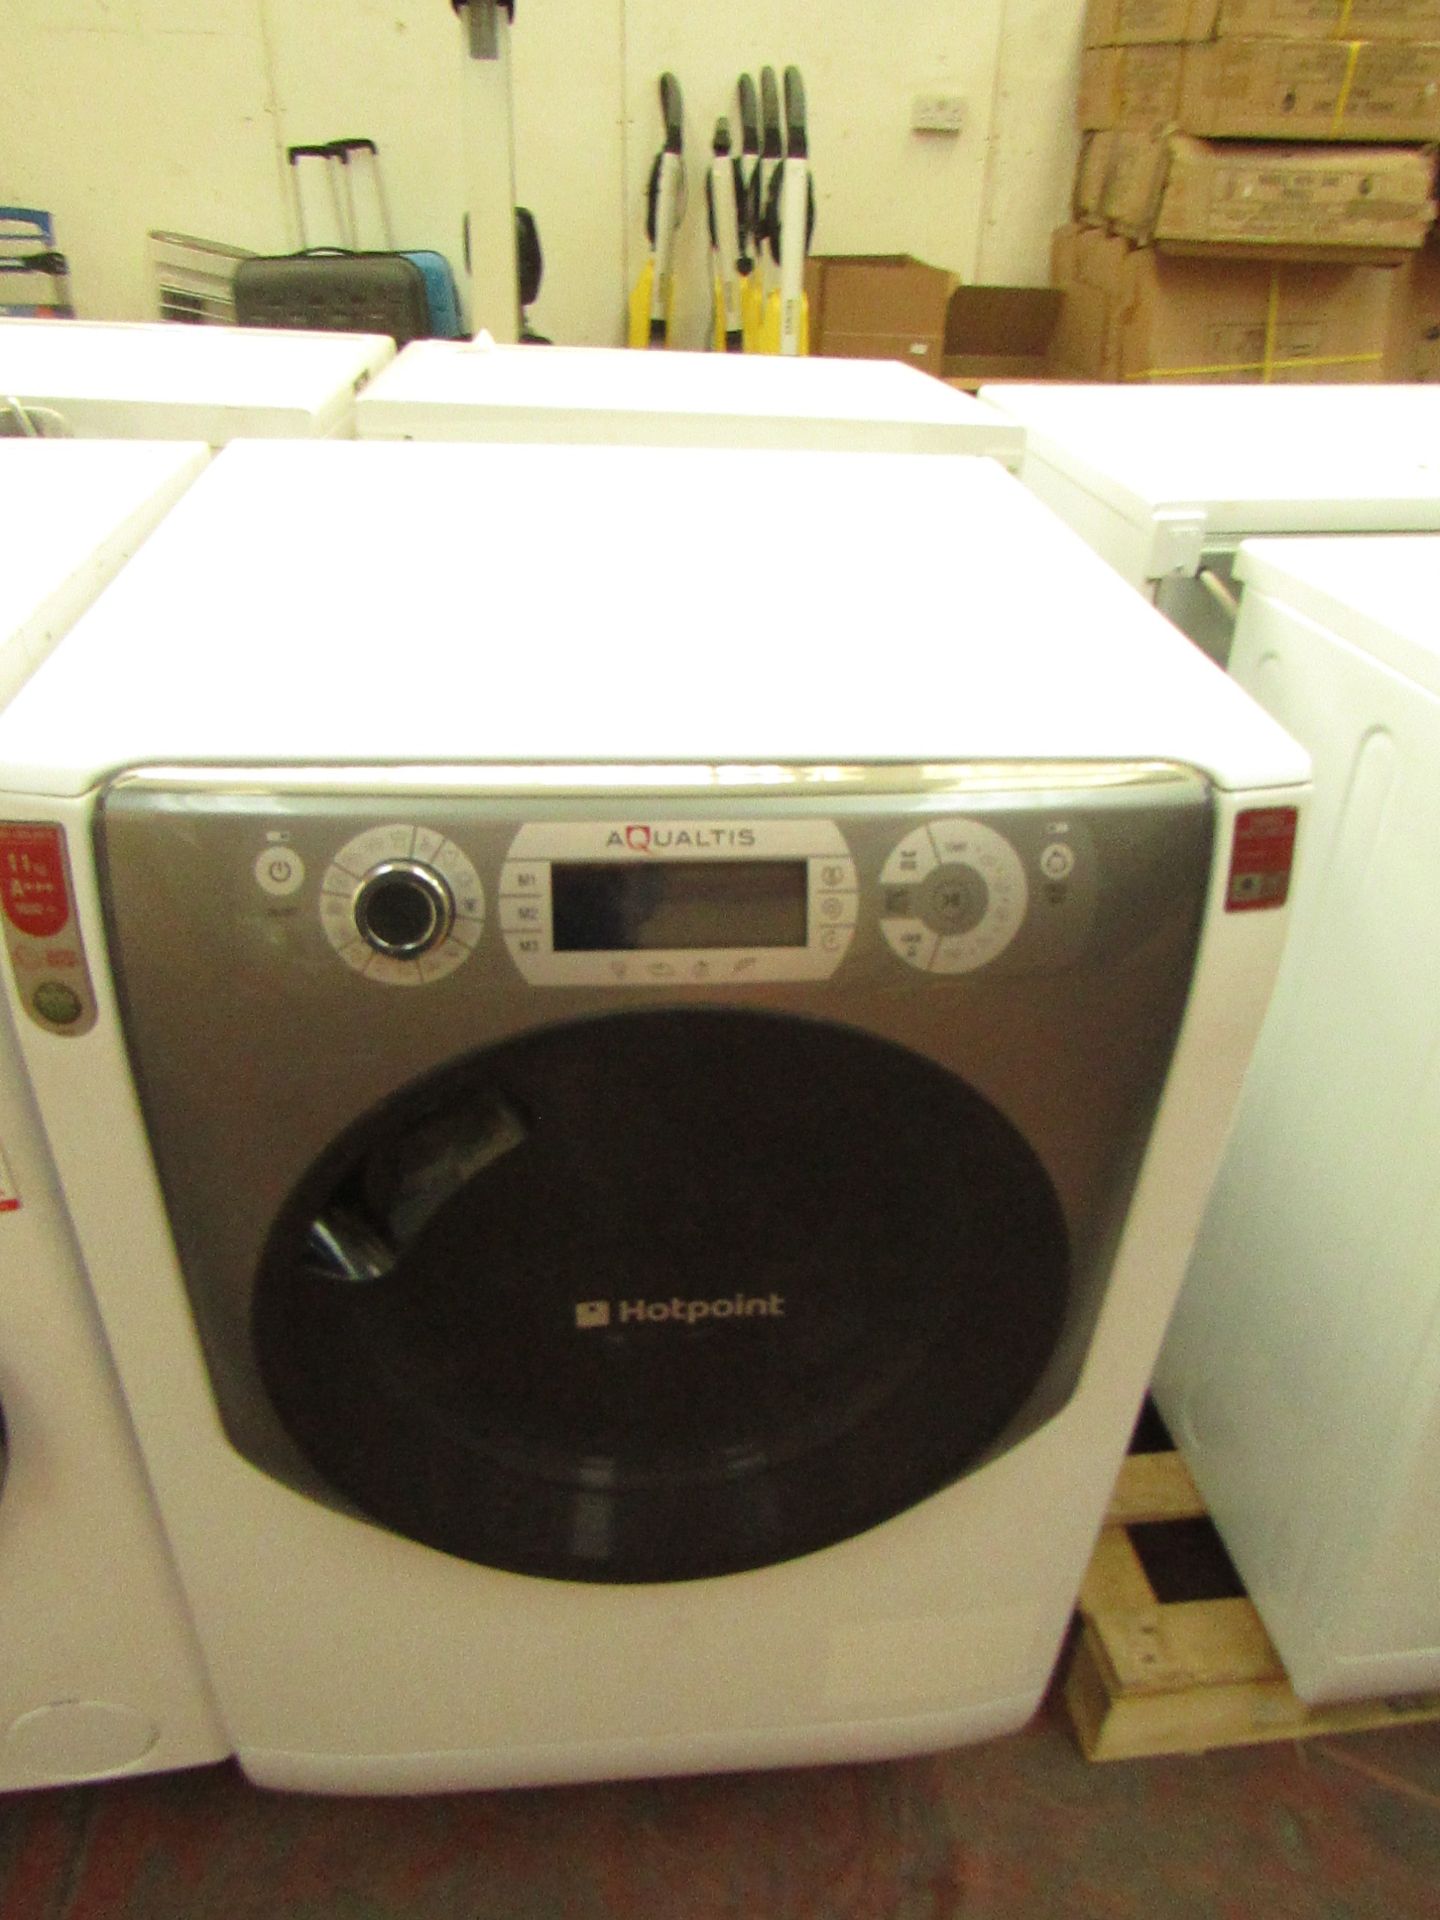 Hotpoint Aqualtis 11KG washing machine, powers on but doesn't spin.